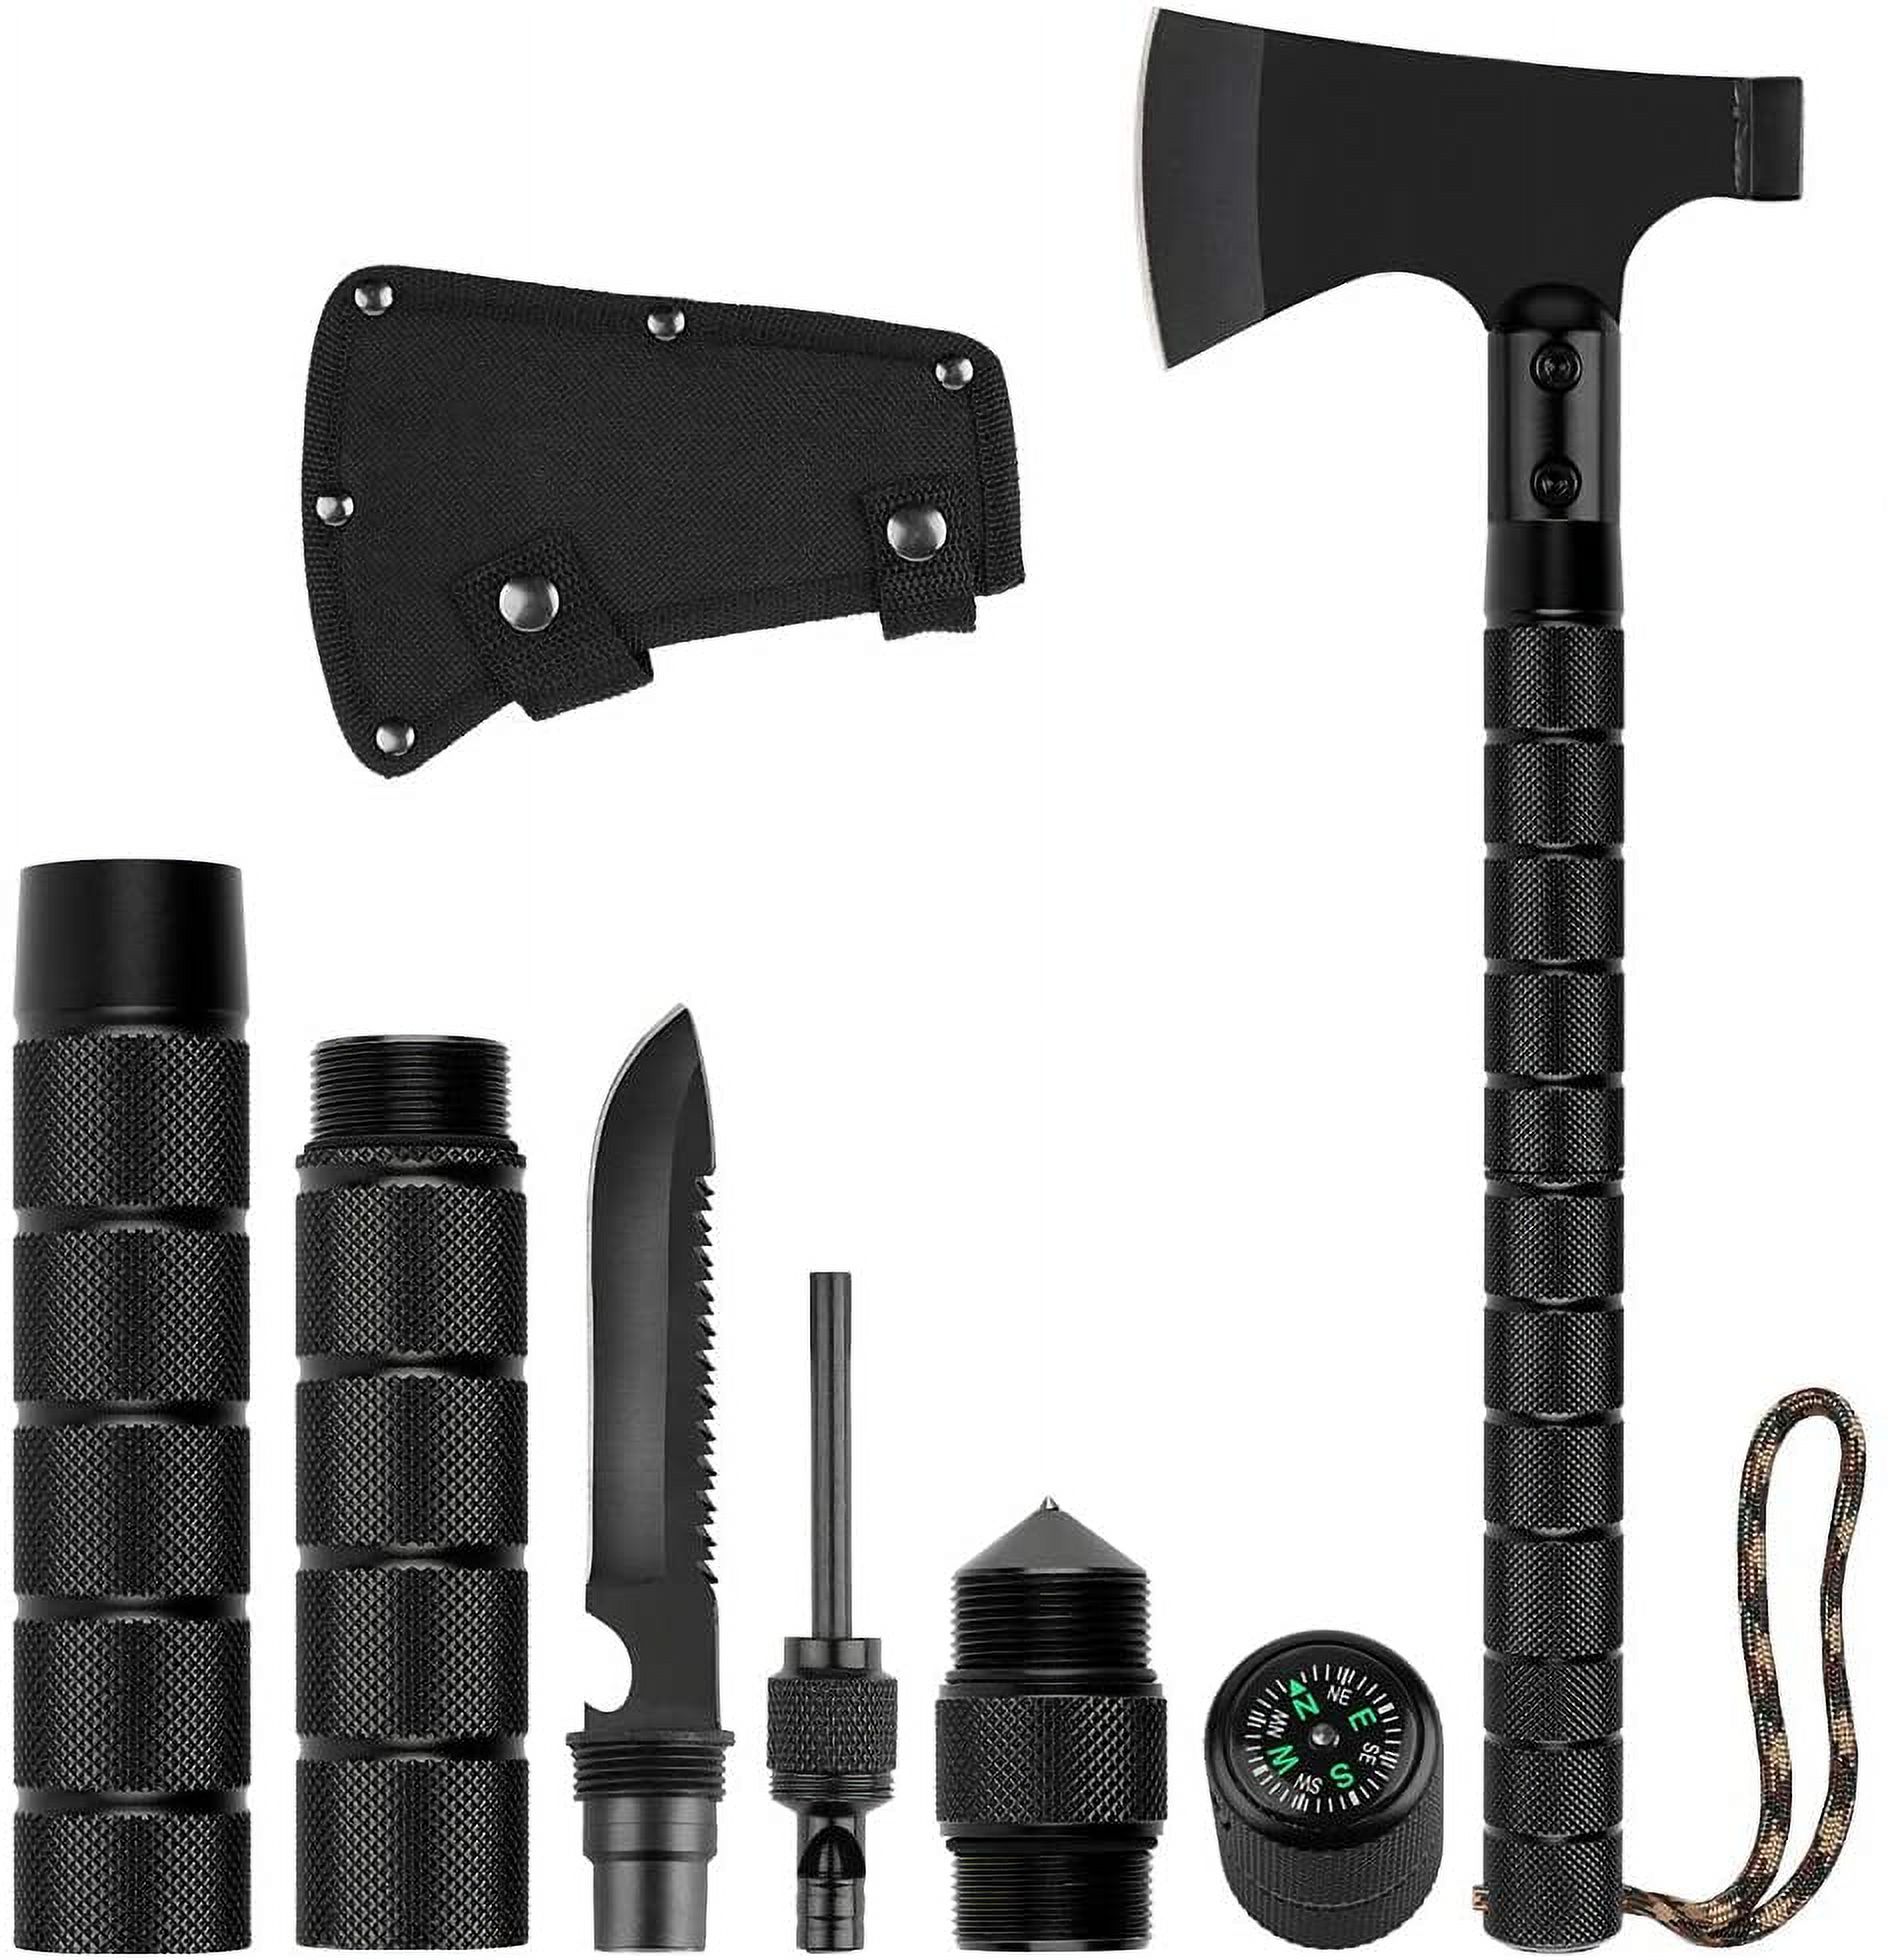 Survival Axe Portable Camping Axe Multi-Tool Hatchet Survival Kit - image 1 of 7